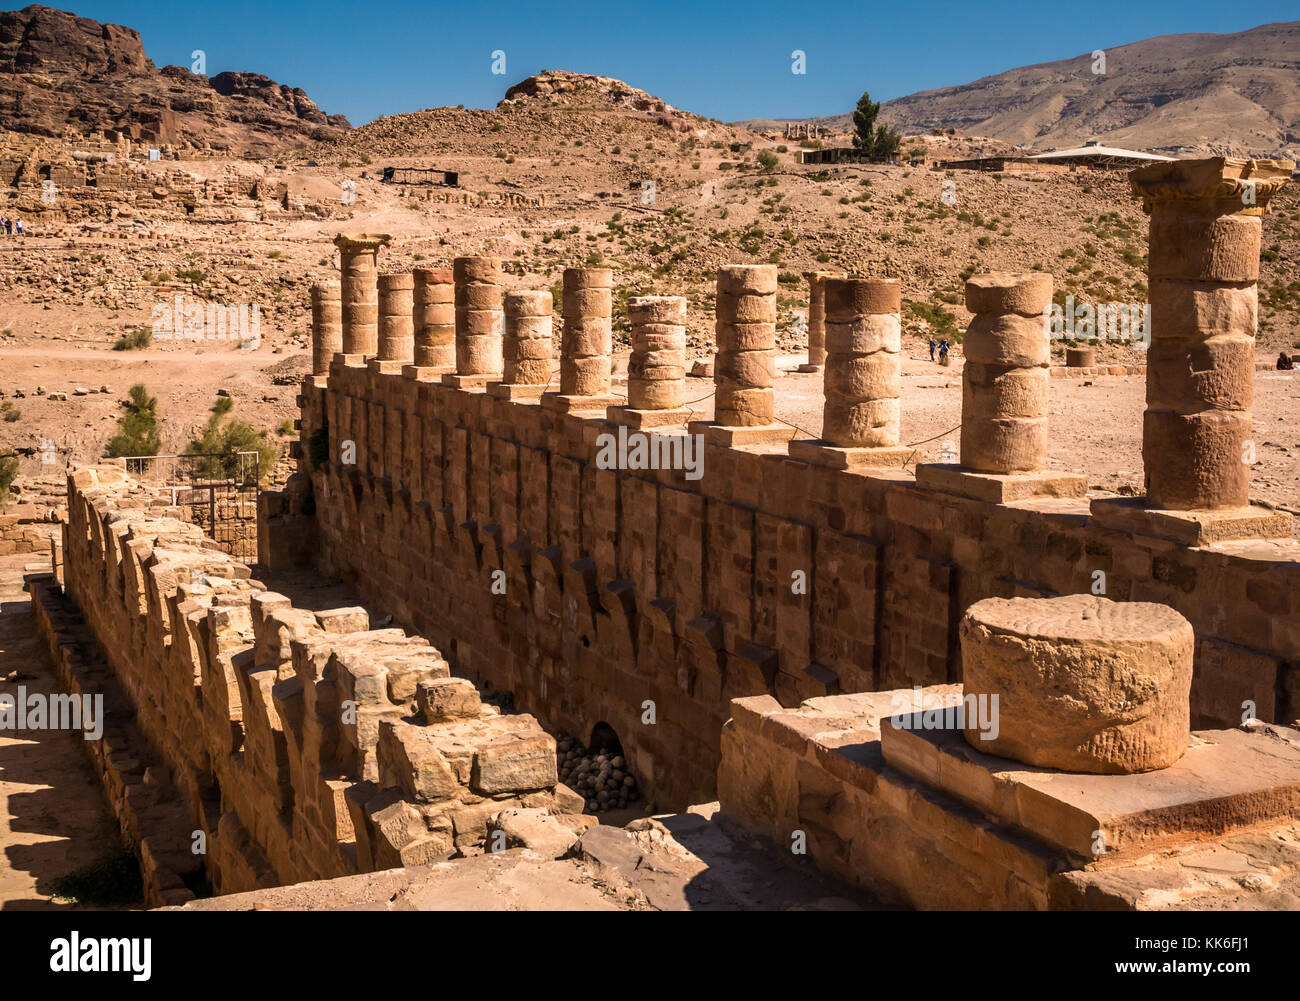 Rows of ruined Corinthian columns at the Great Temple, Petra archaeological site, Jordan, Middle East with blue sky Stock Photo